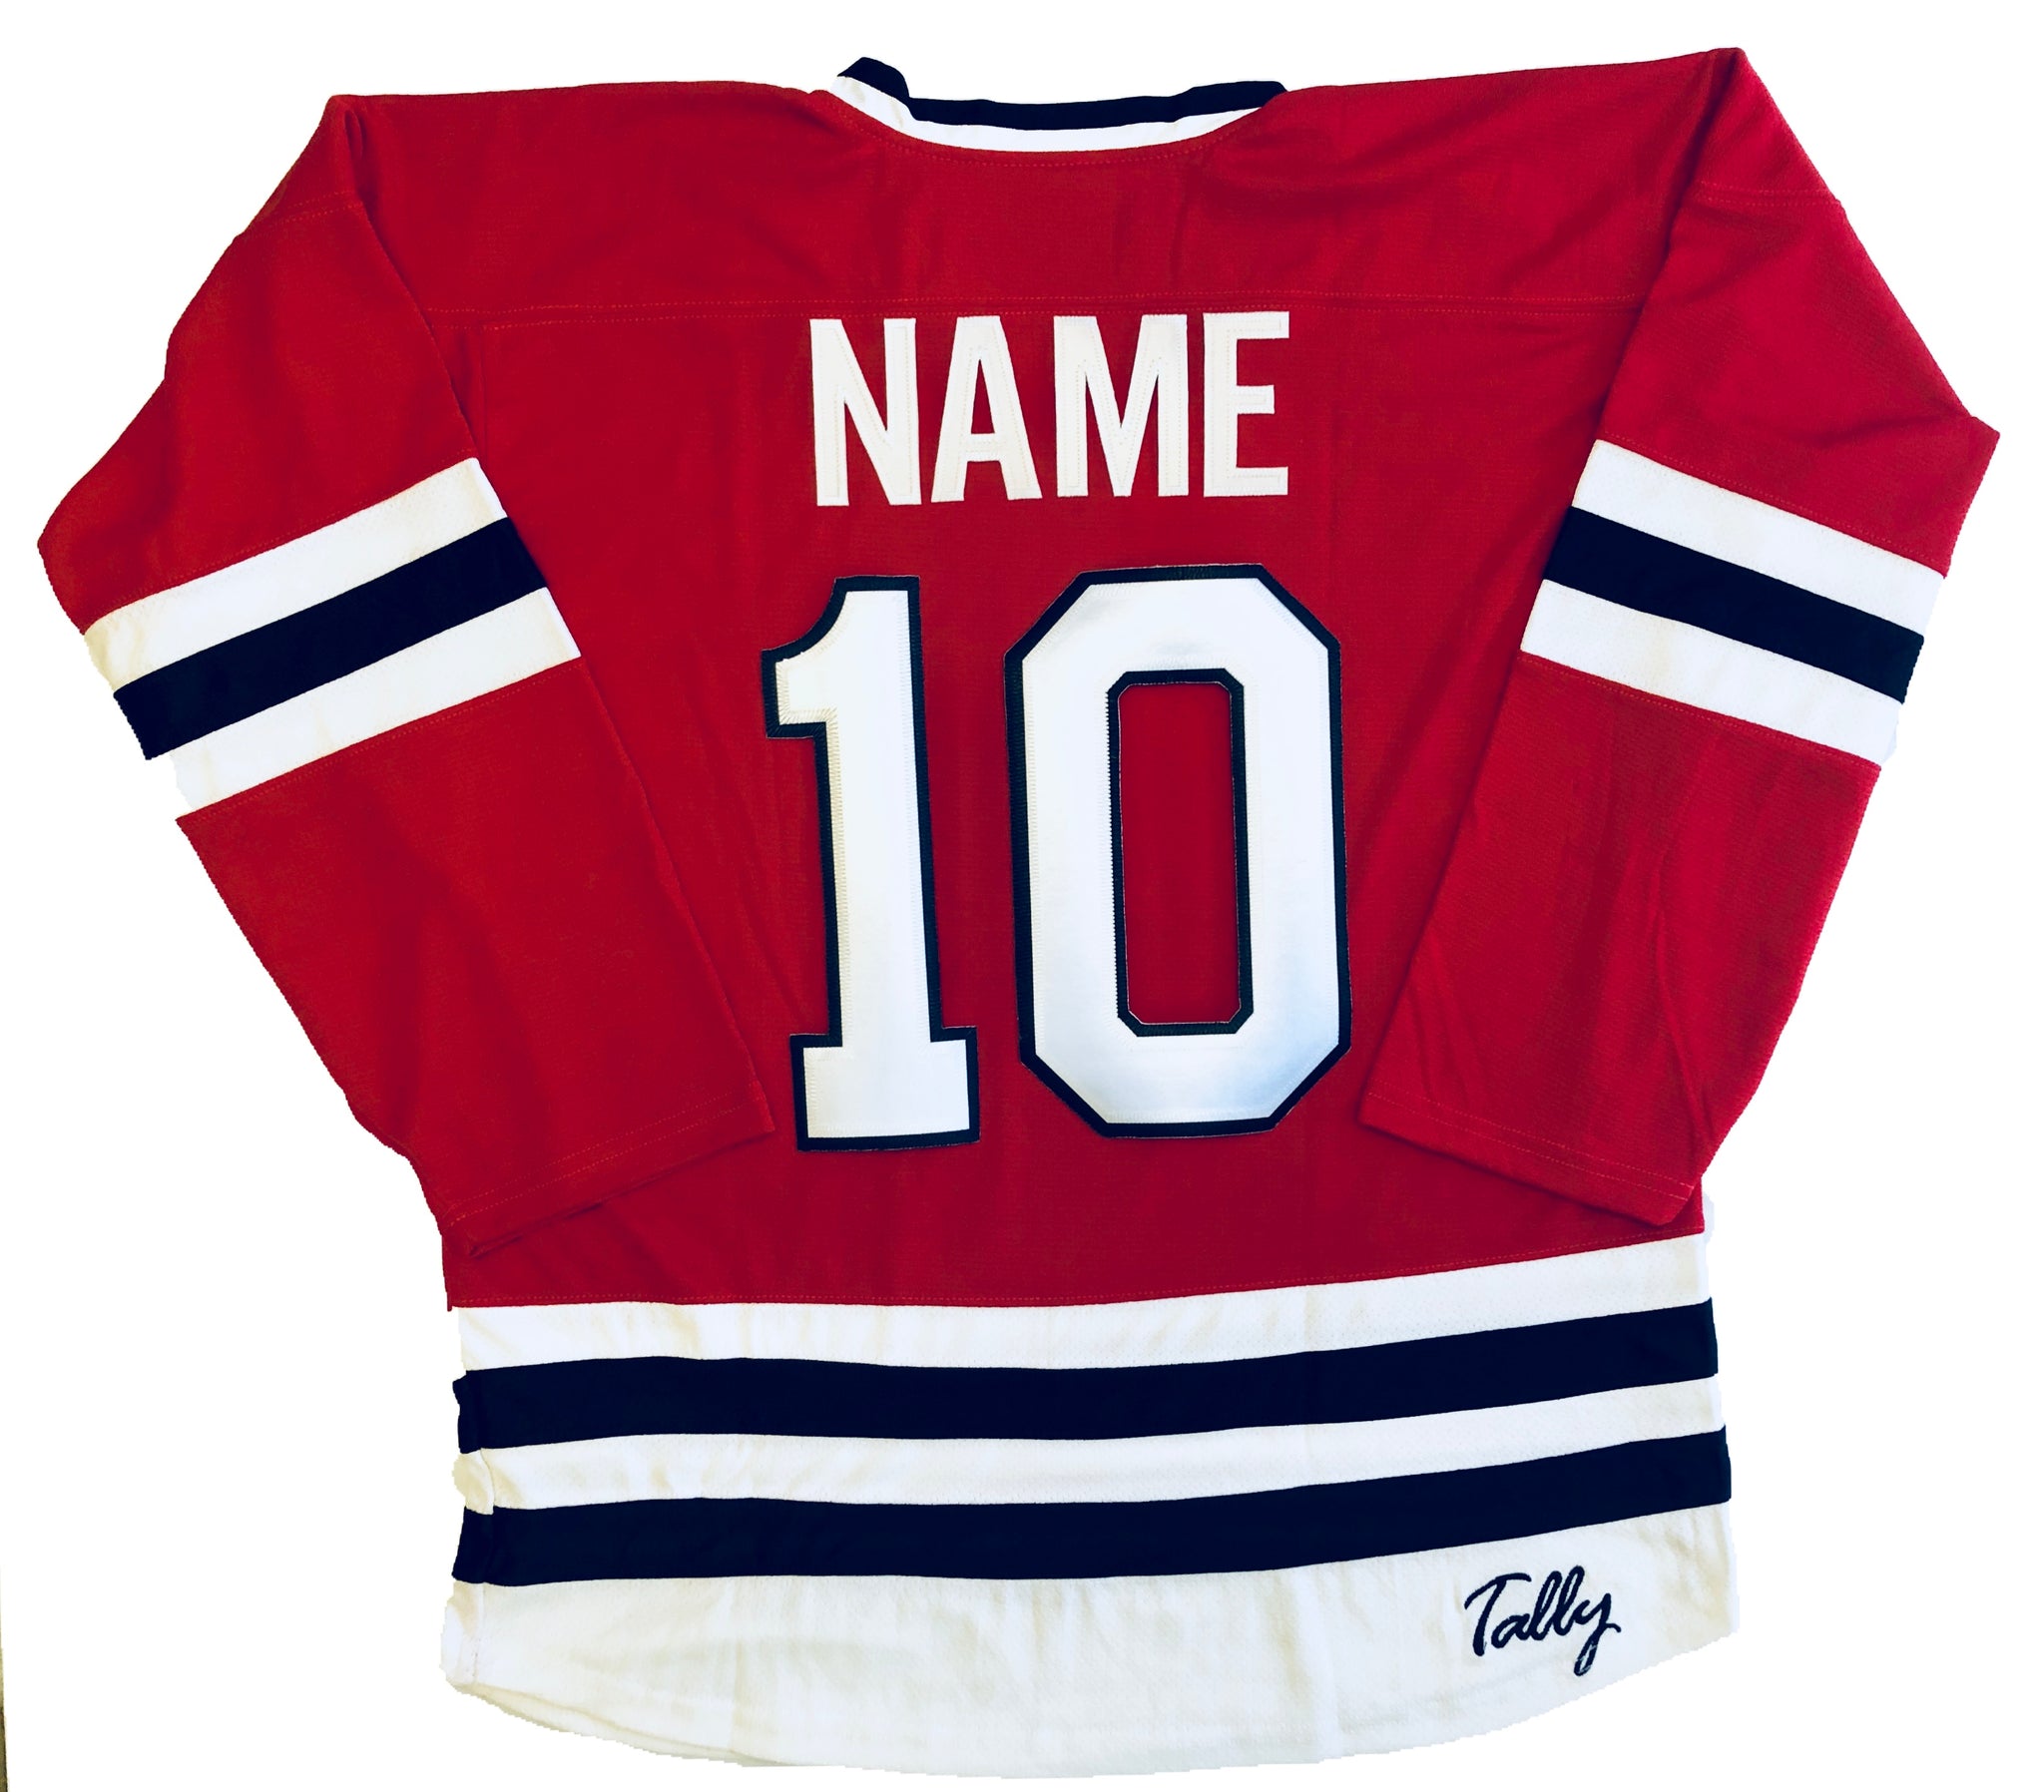 Team Canada Hockey Jerseys - We Customize with Player Name and Number